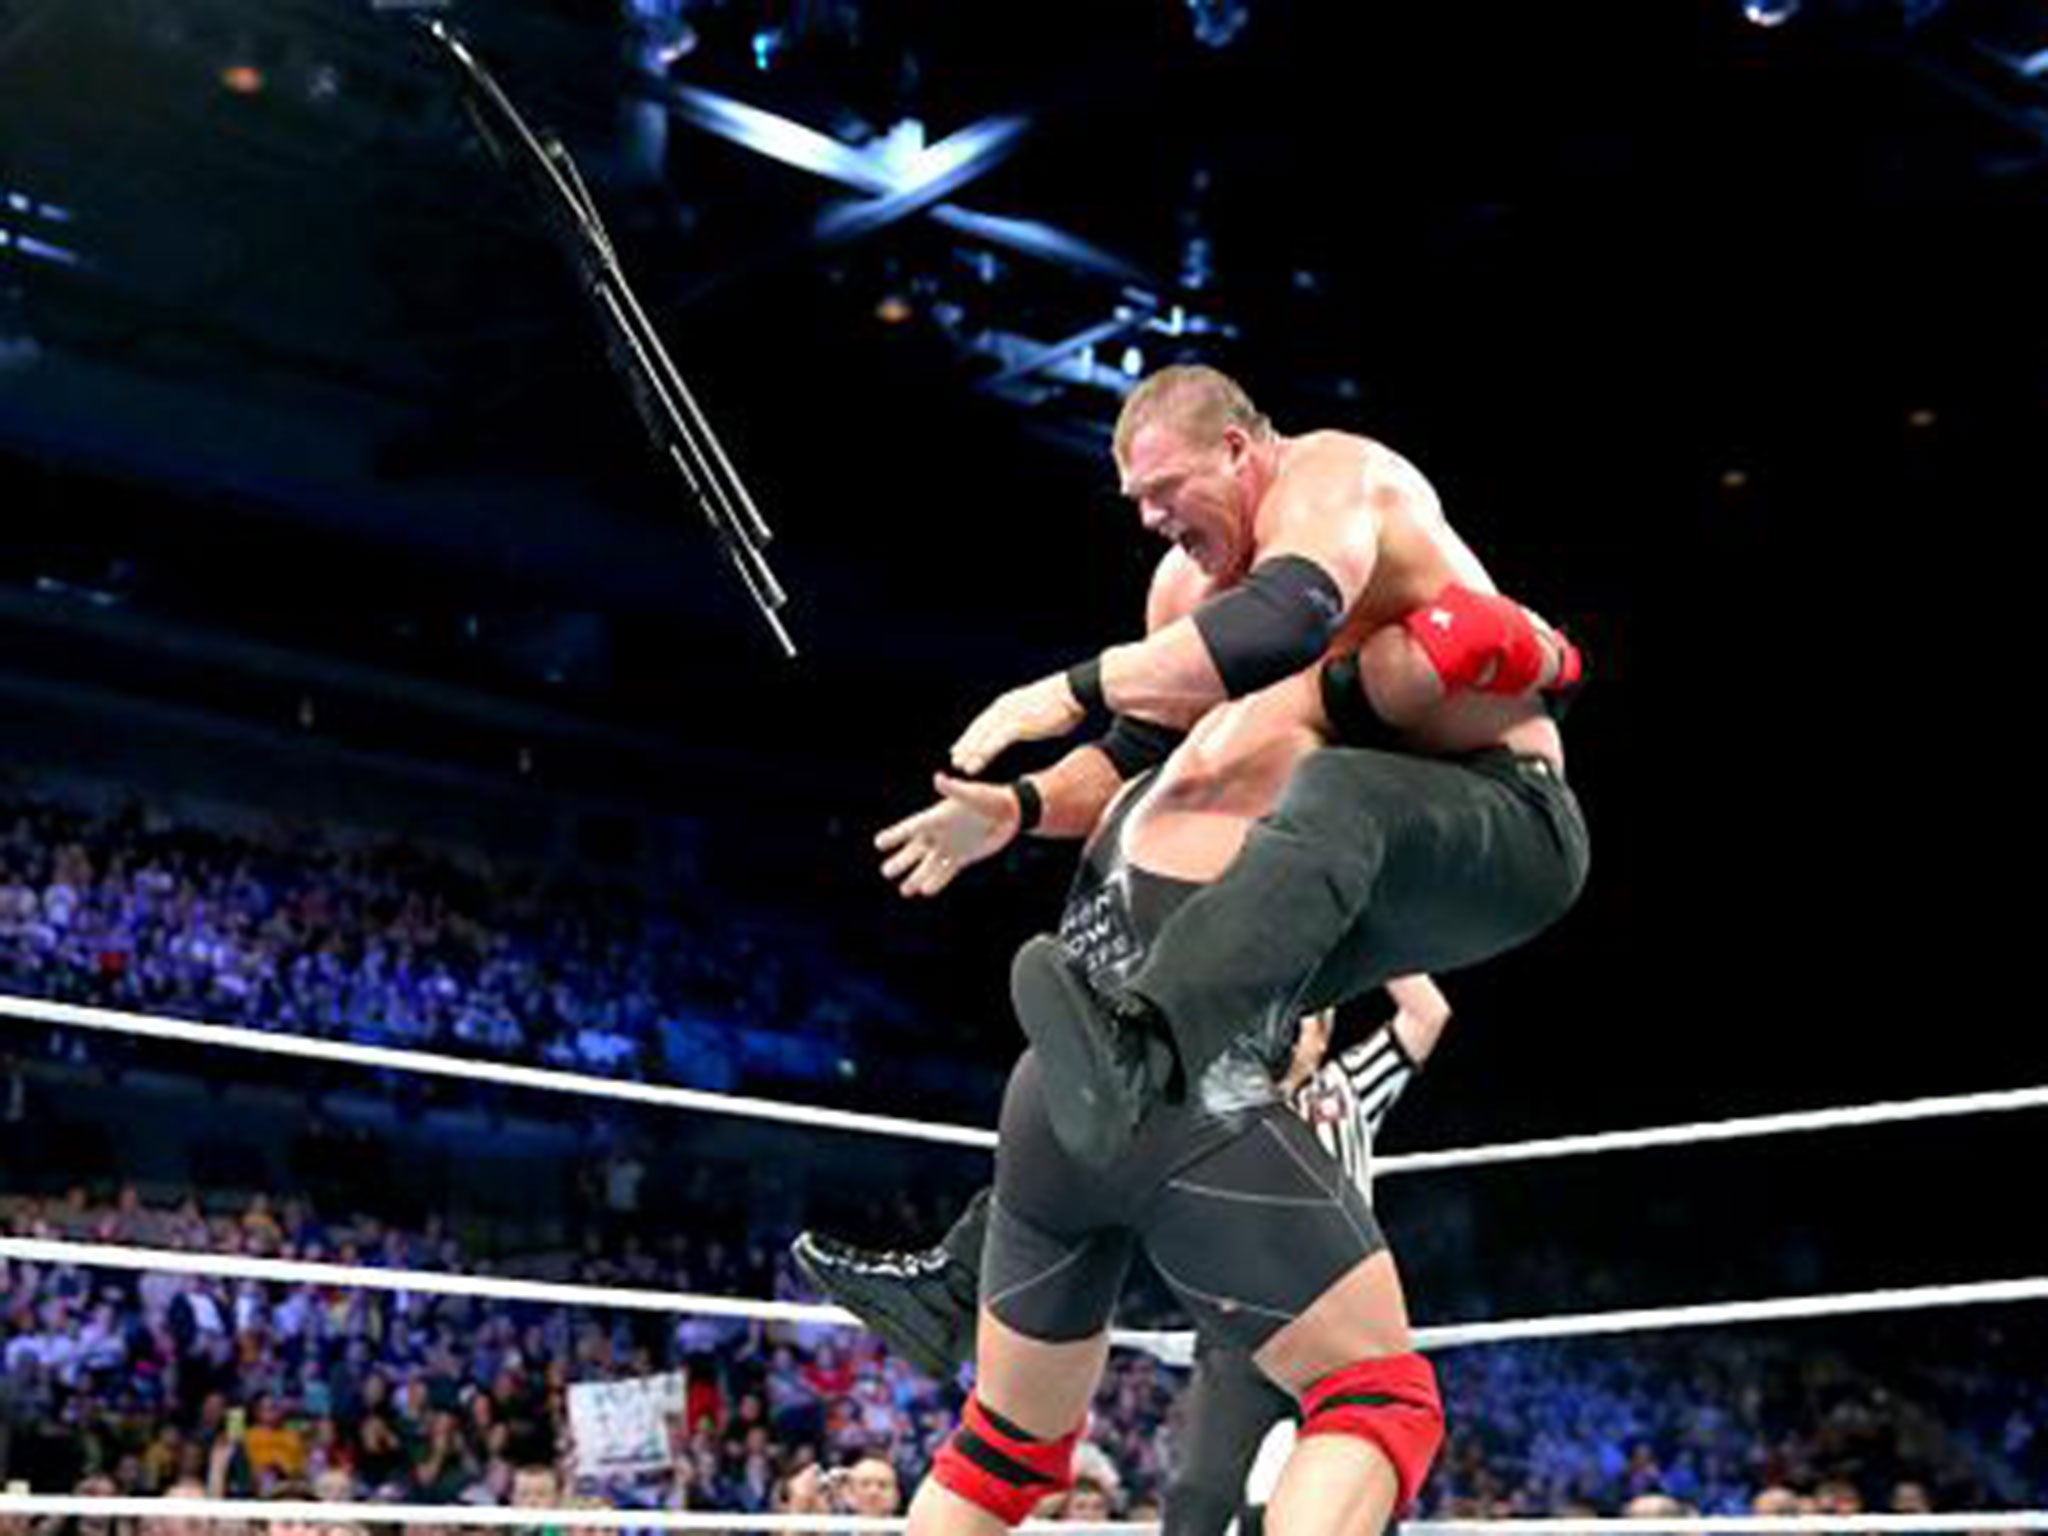 Ryback hits Kane with a spine-buster